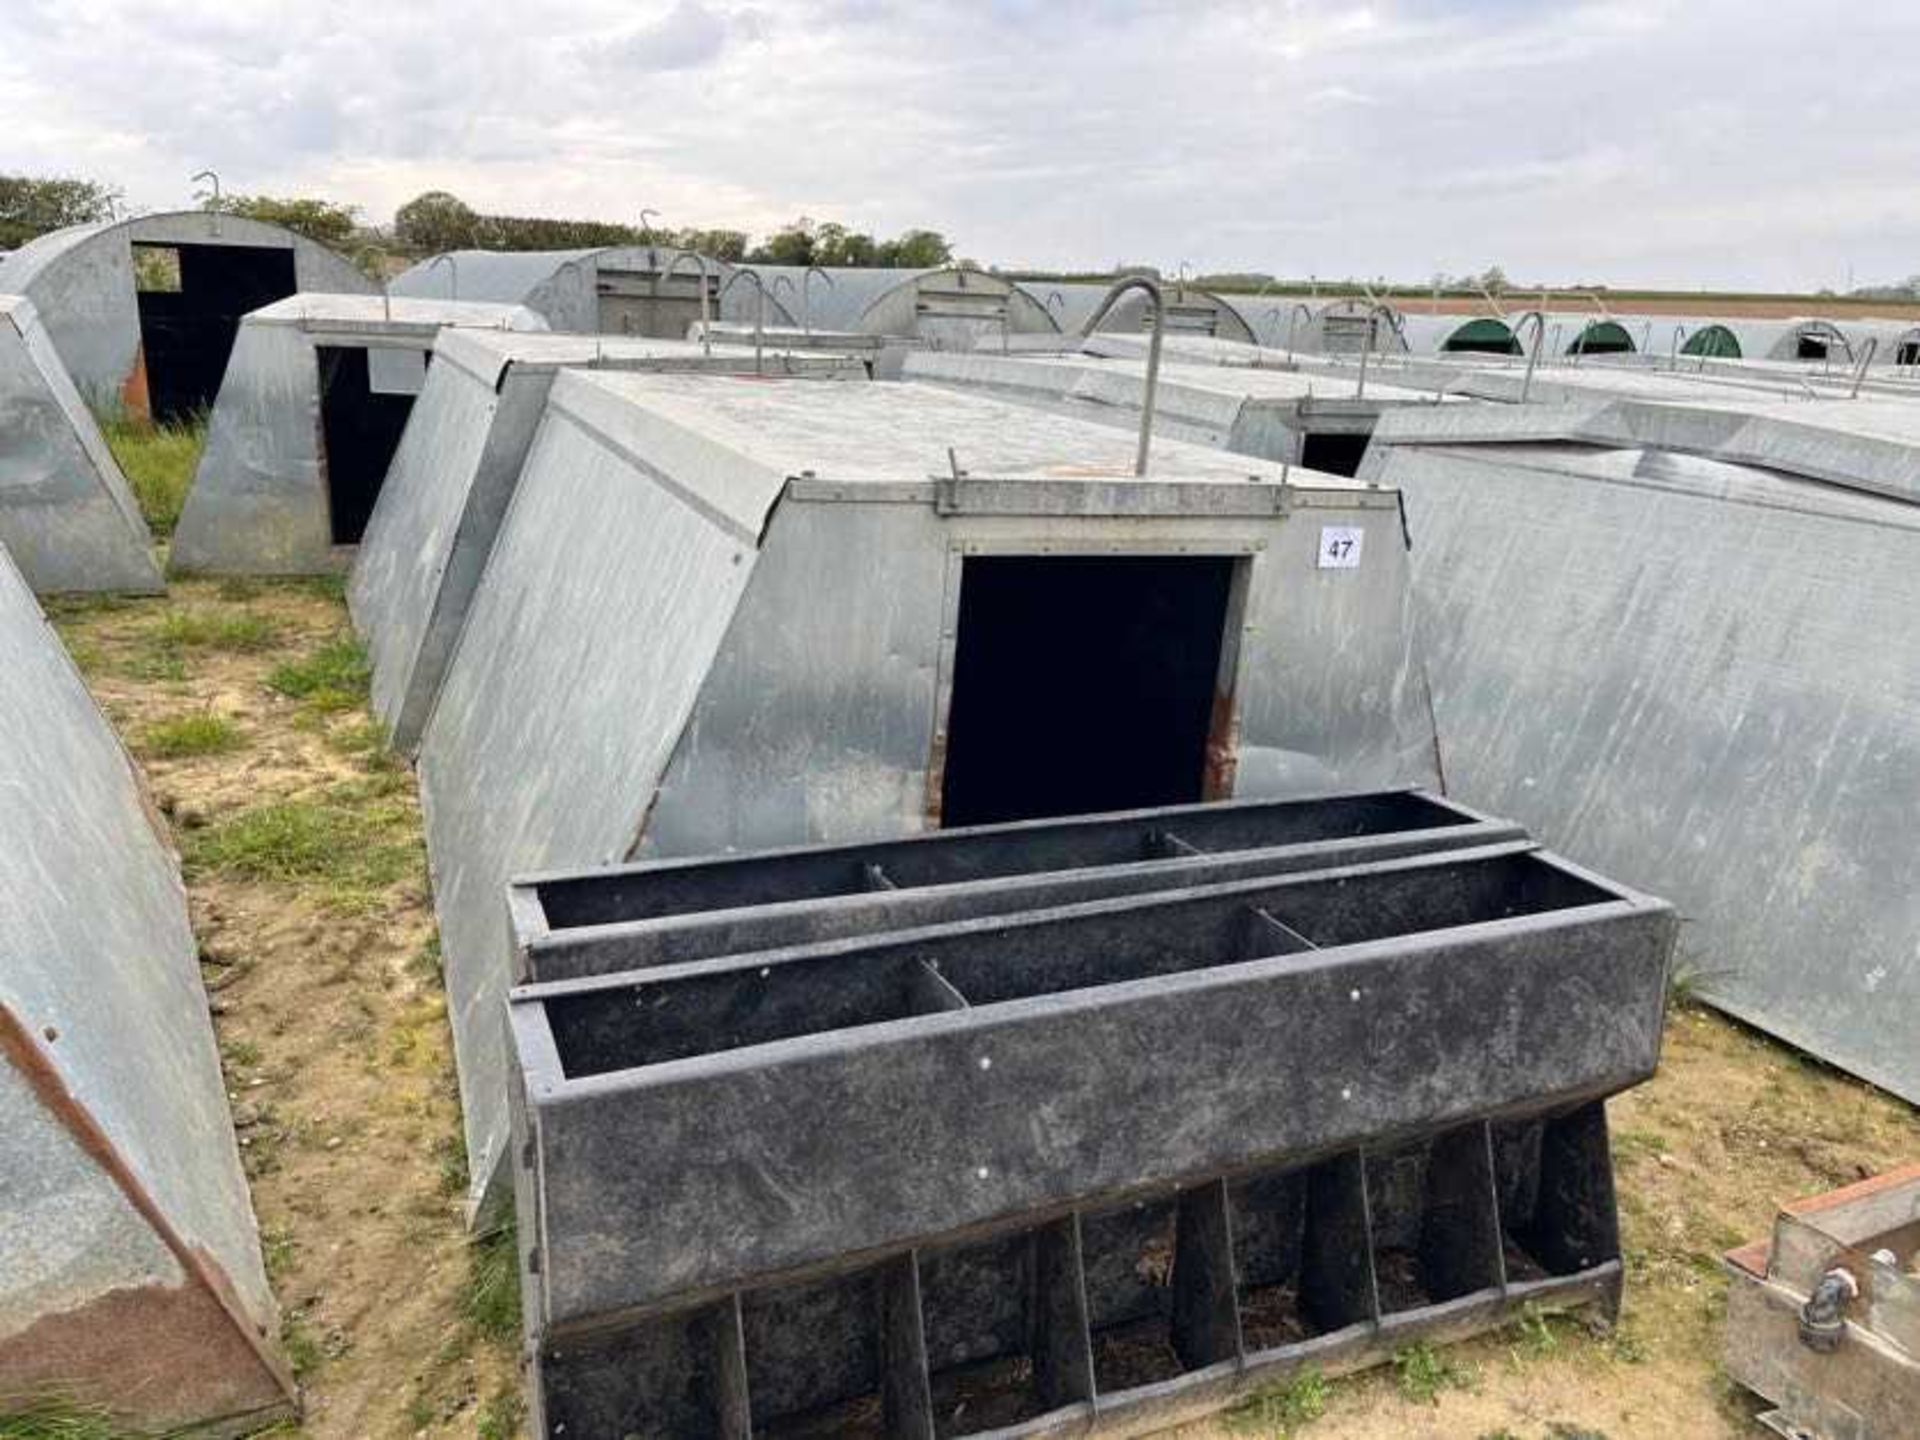 3 x John Booth insulated galvanised kennel farrowing huts